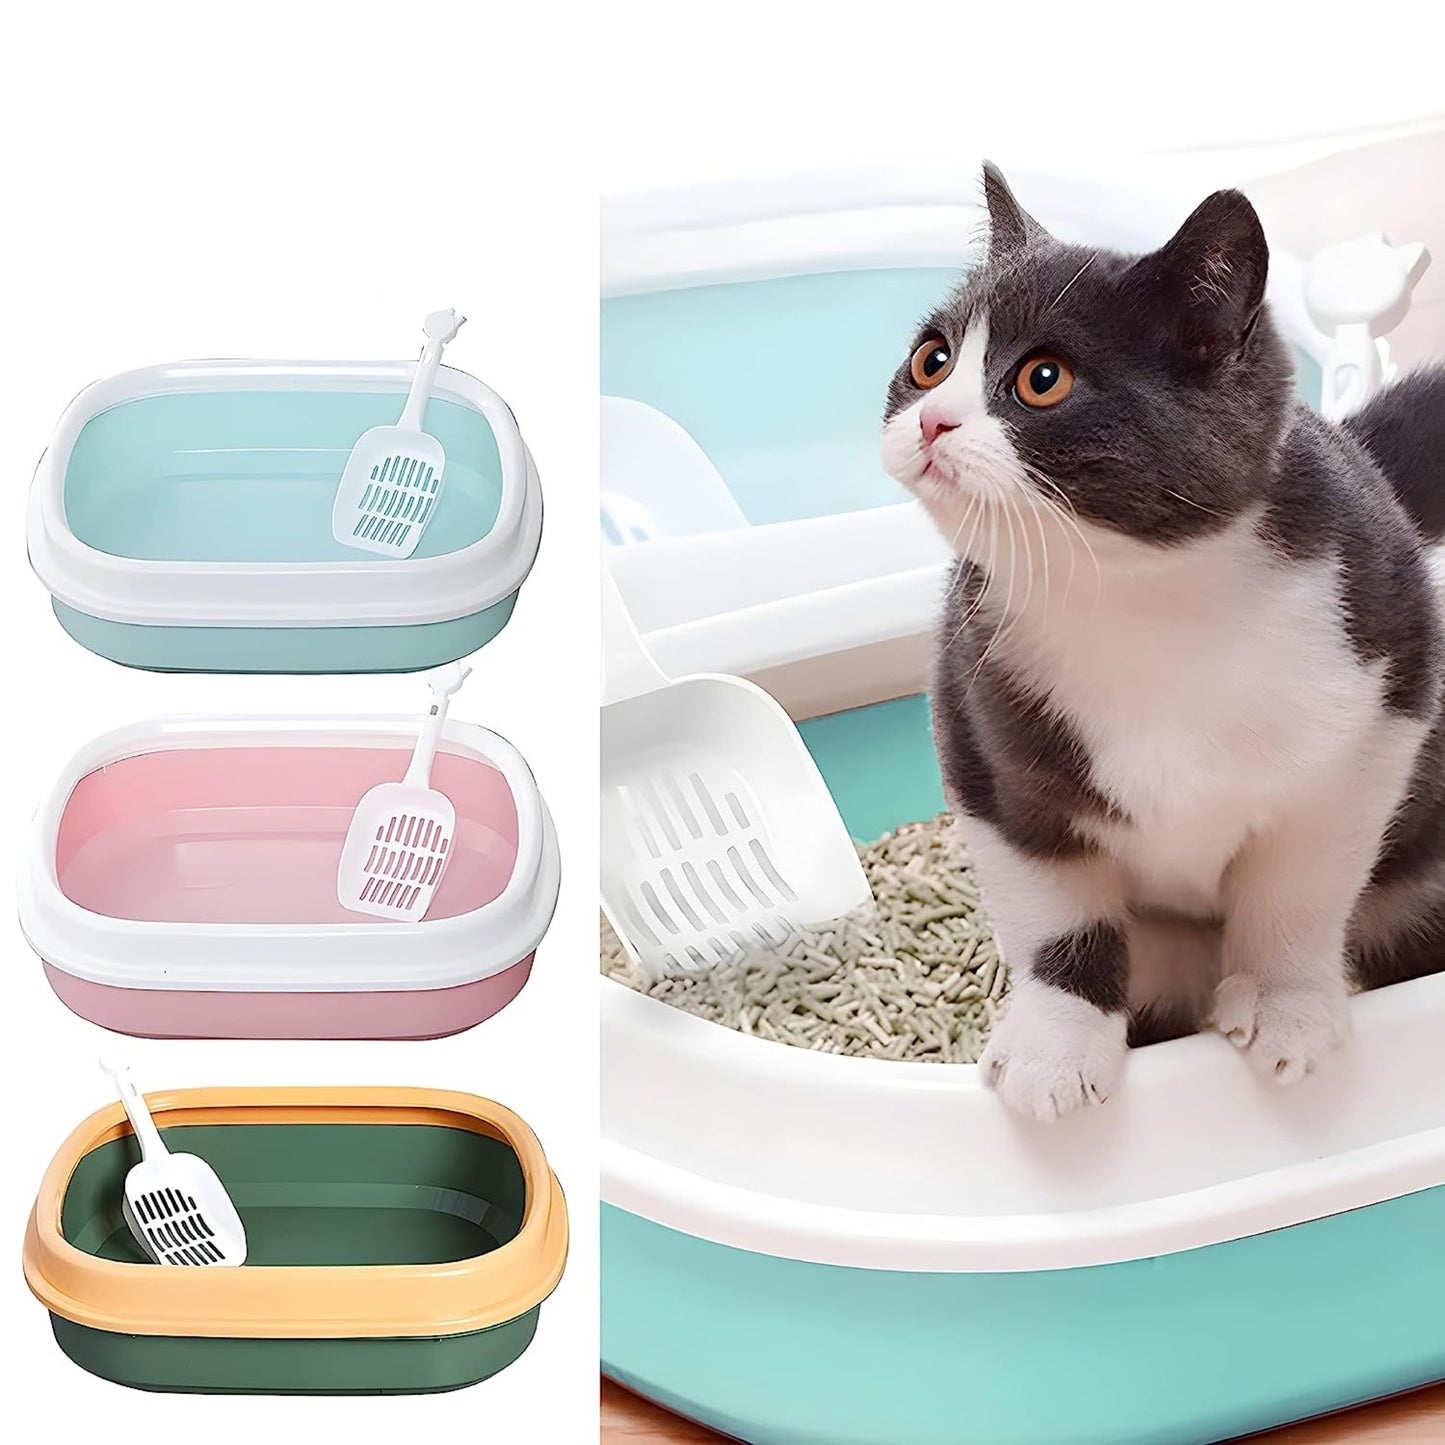 Foodie Puppies Cat Litter Tray with Rim & Scooper - Turquoise